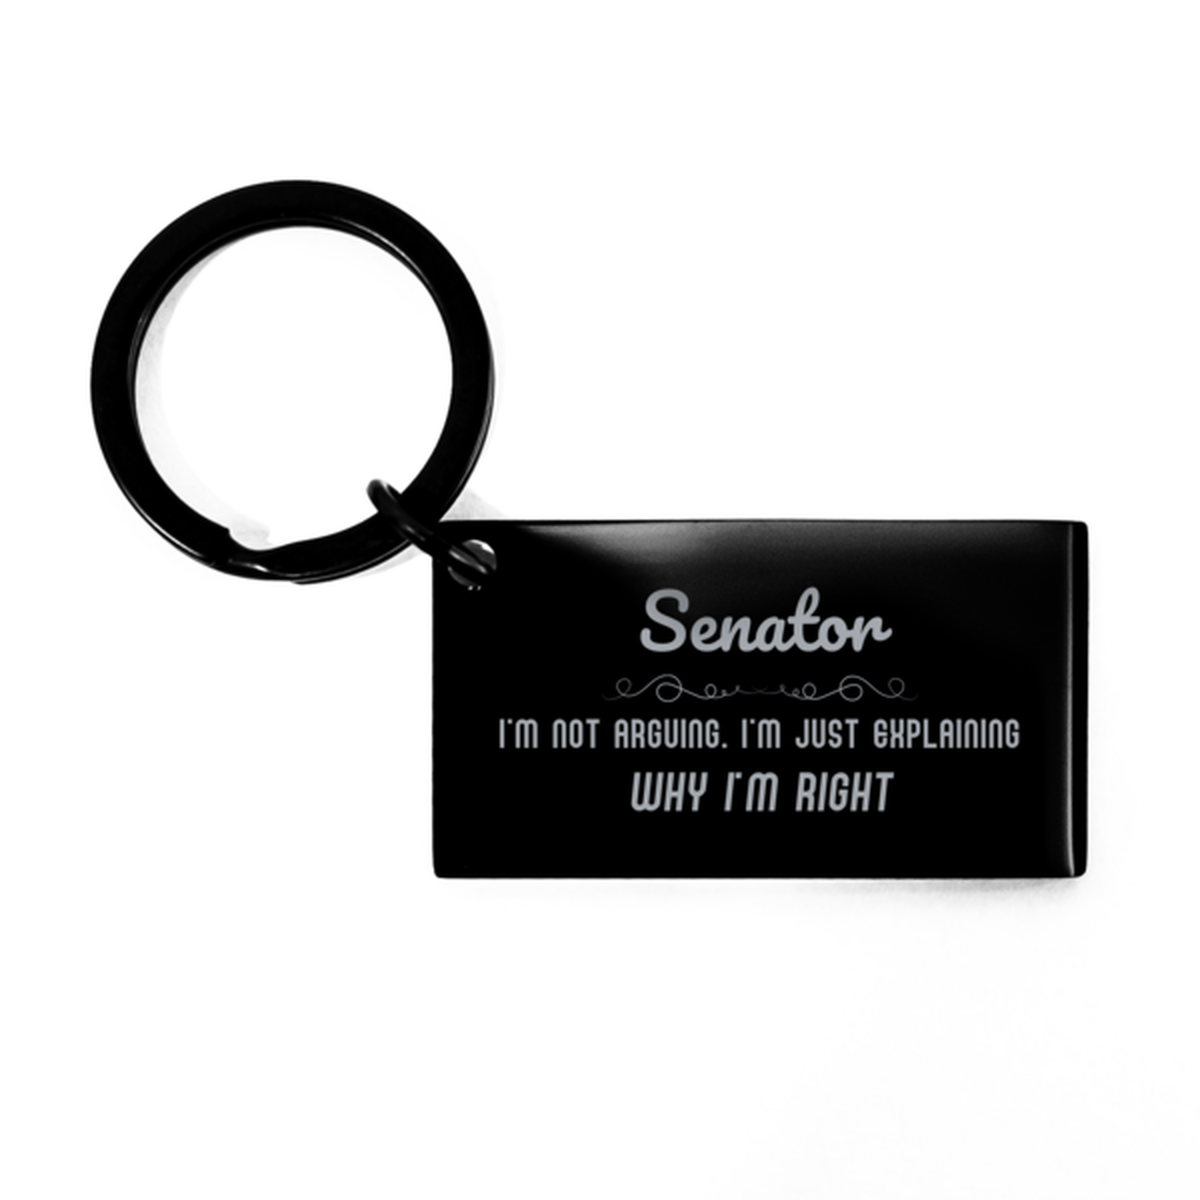 Senator I'm not Arguing. I'm Just Explaining Why I'm RIGHT Keychain, Funny Saying Quote Senator Gifts For Senator Graduation Birthday Christmas Gifts for Men Women Coworker